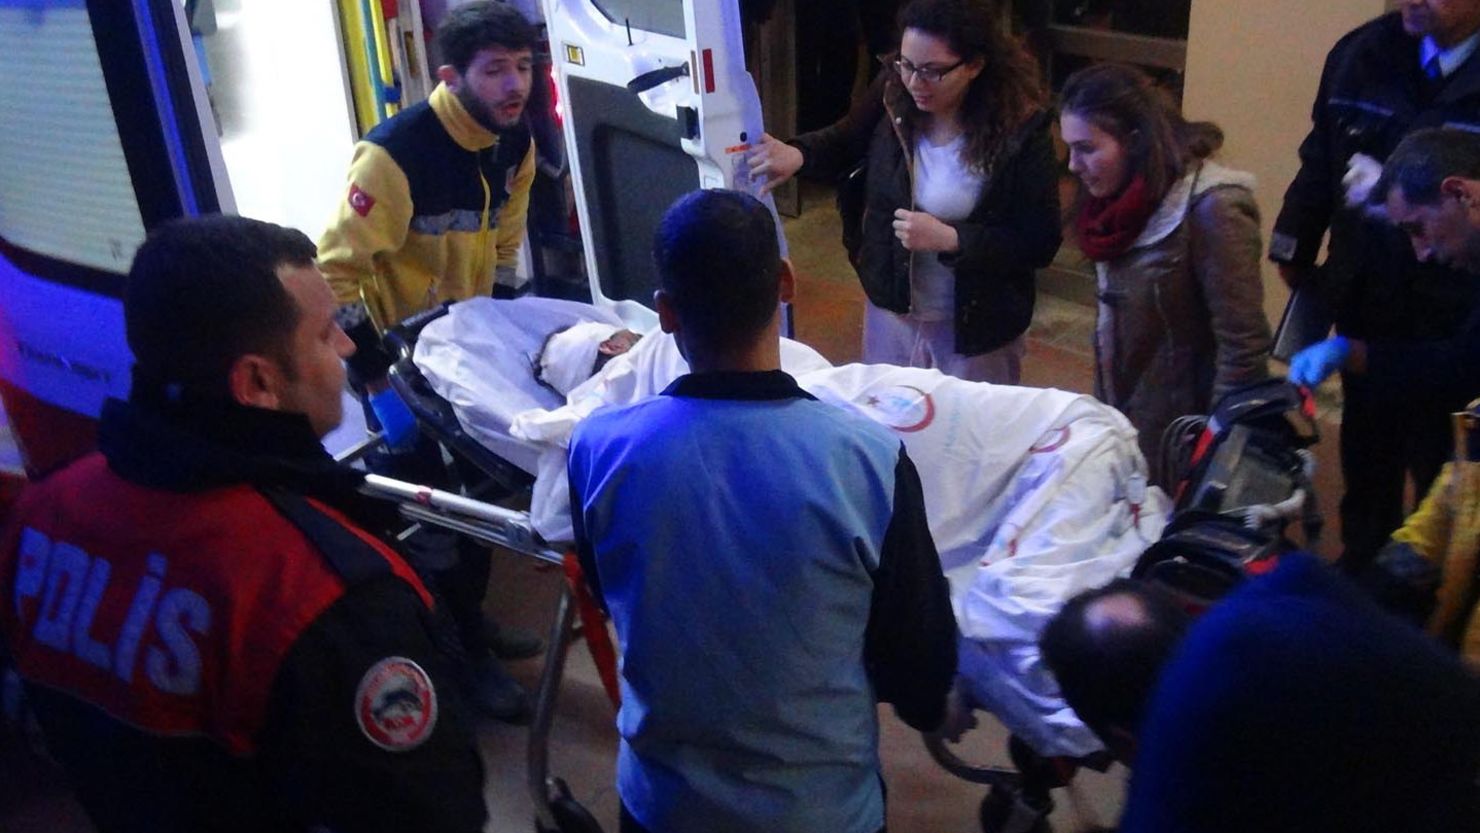 Medical workers load a small child into an ambulance in the town of Viransehir, Turkey.